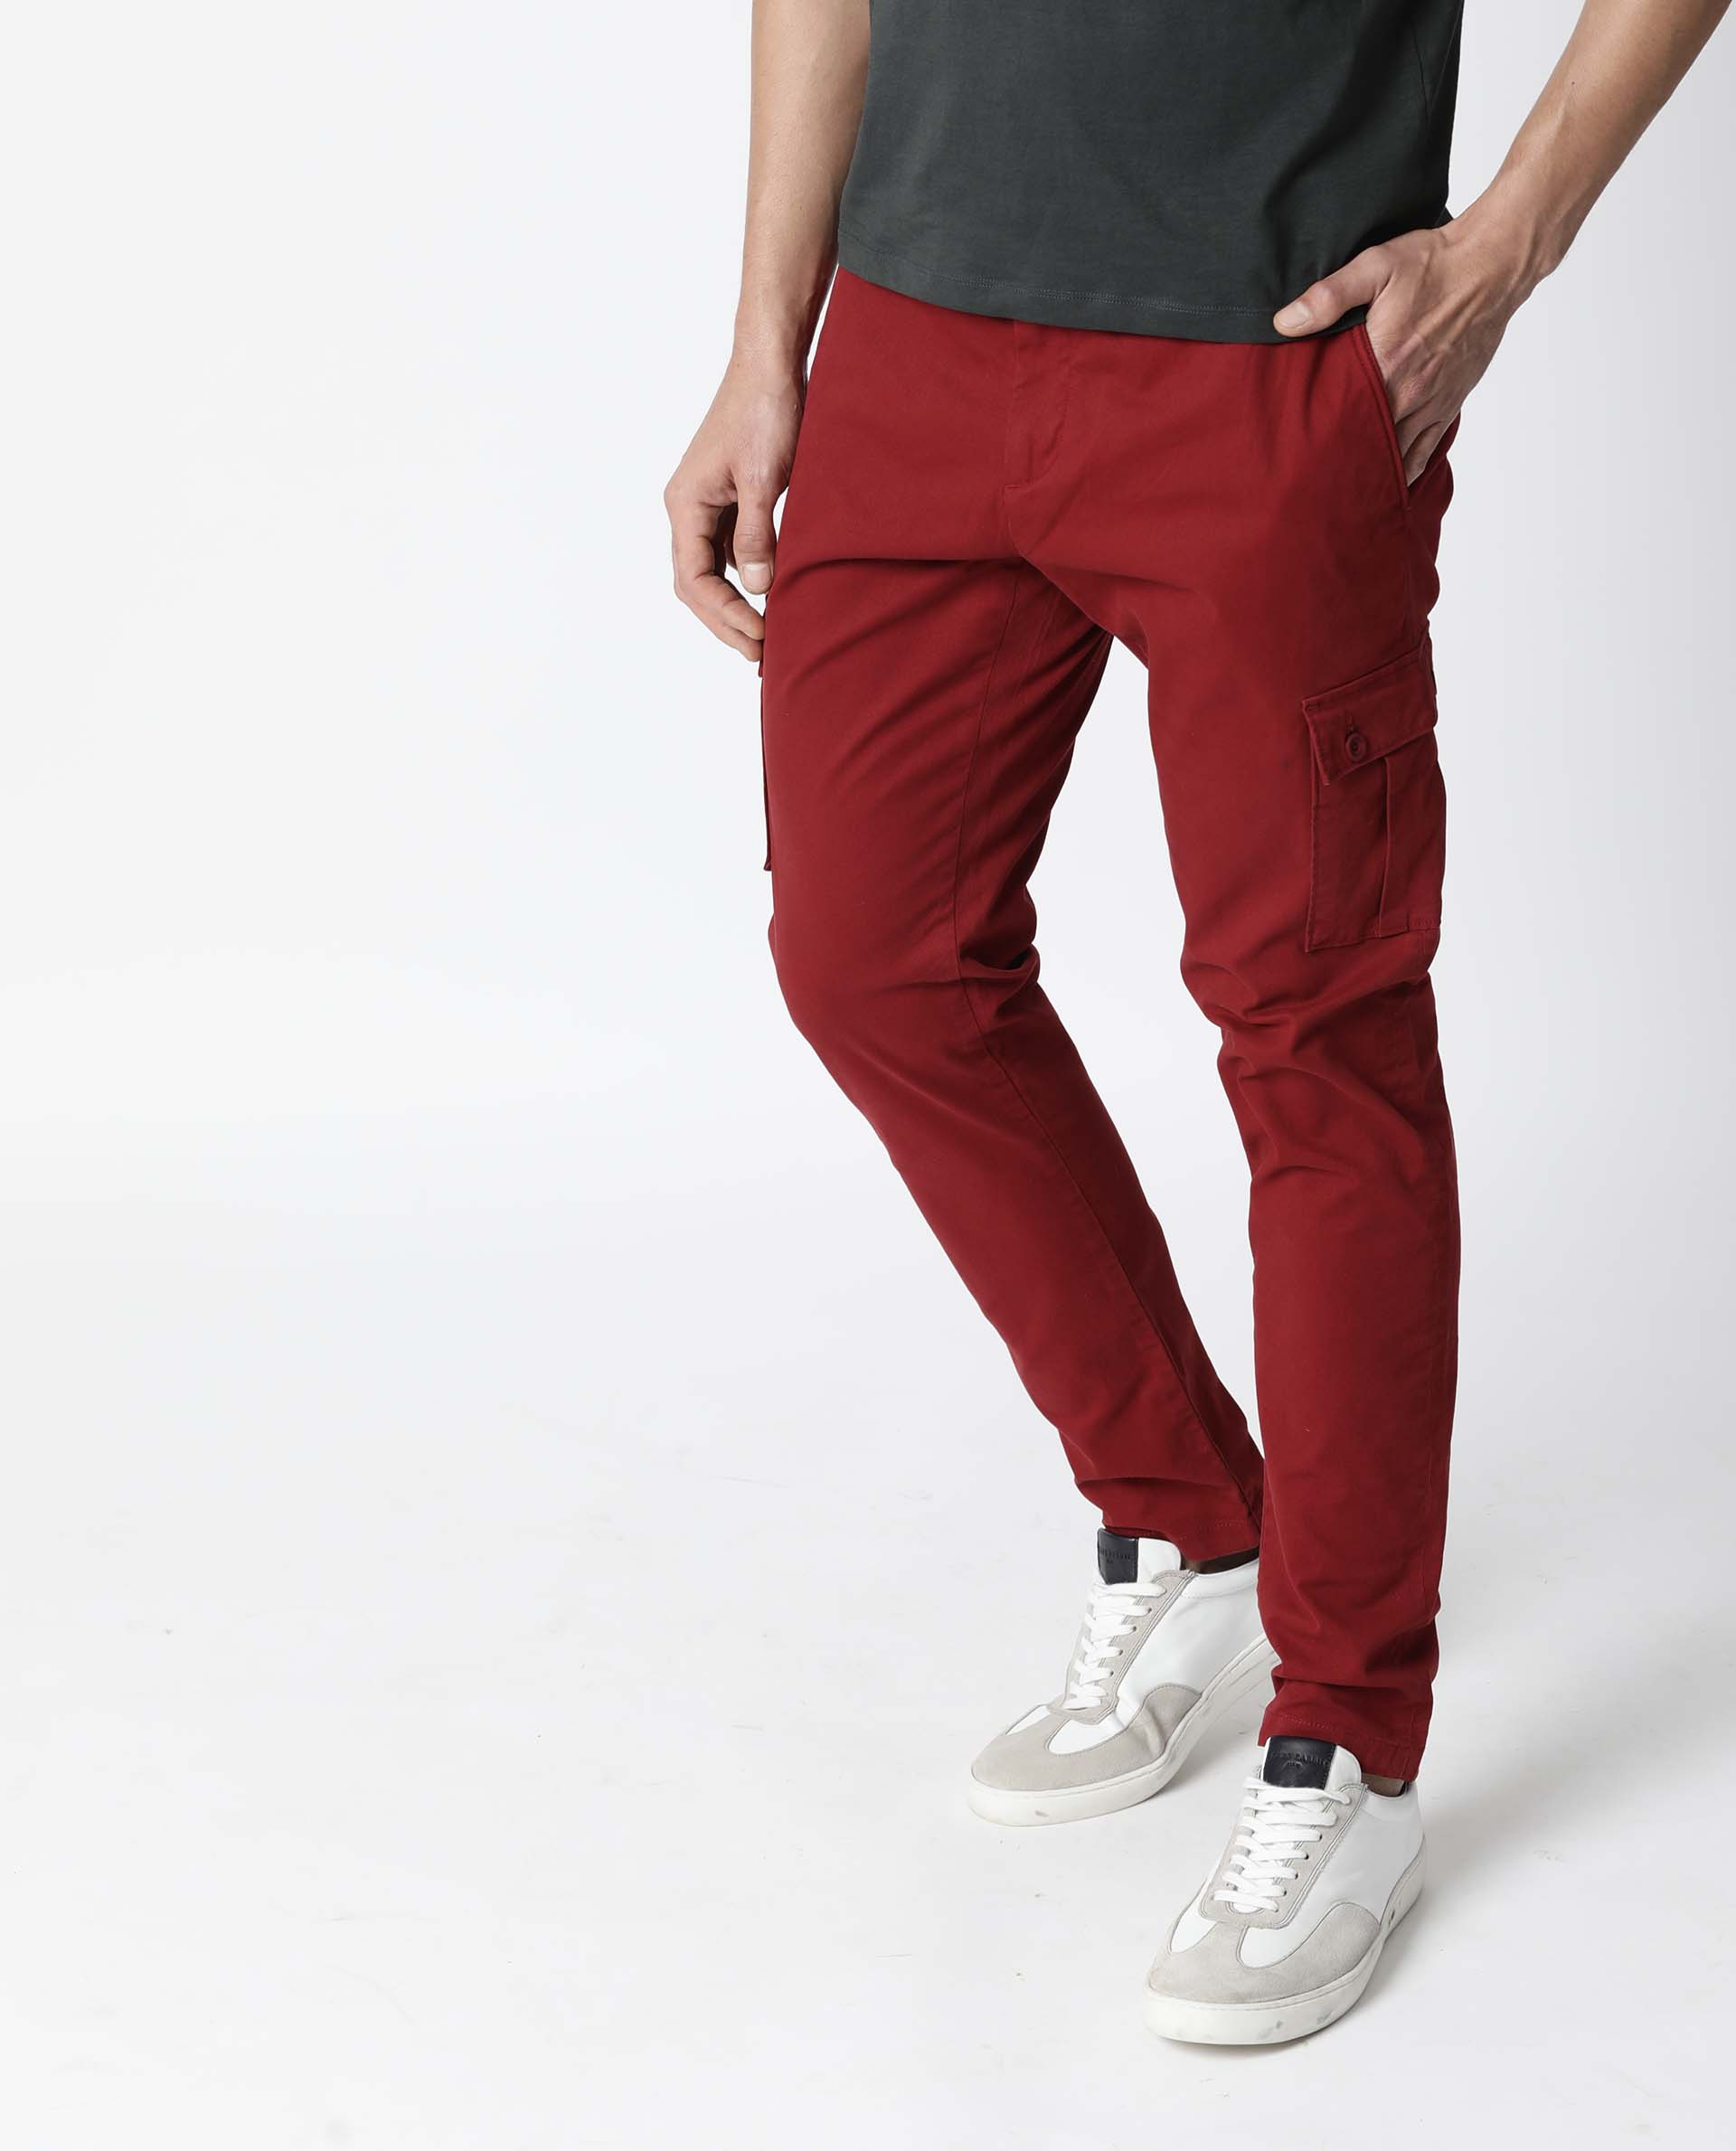 Buy Women Red Trousers online in India